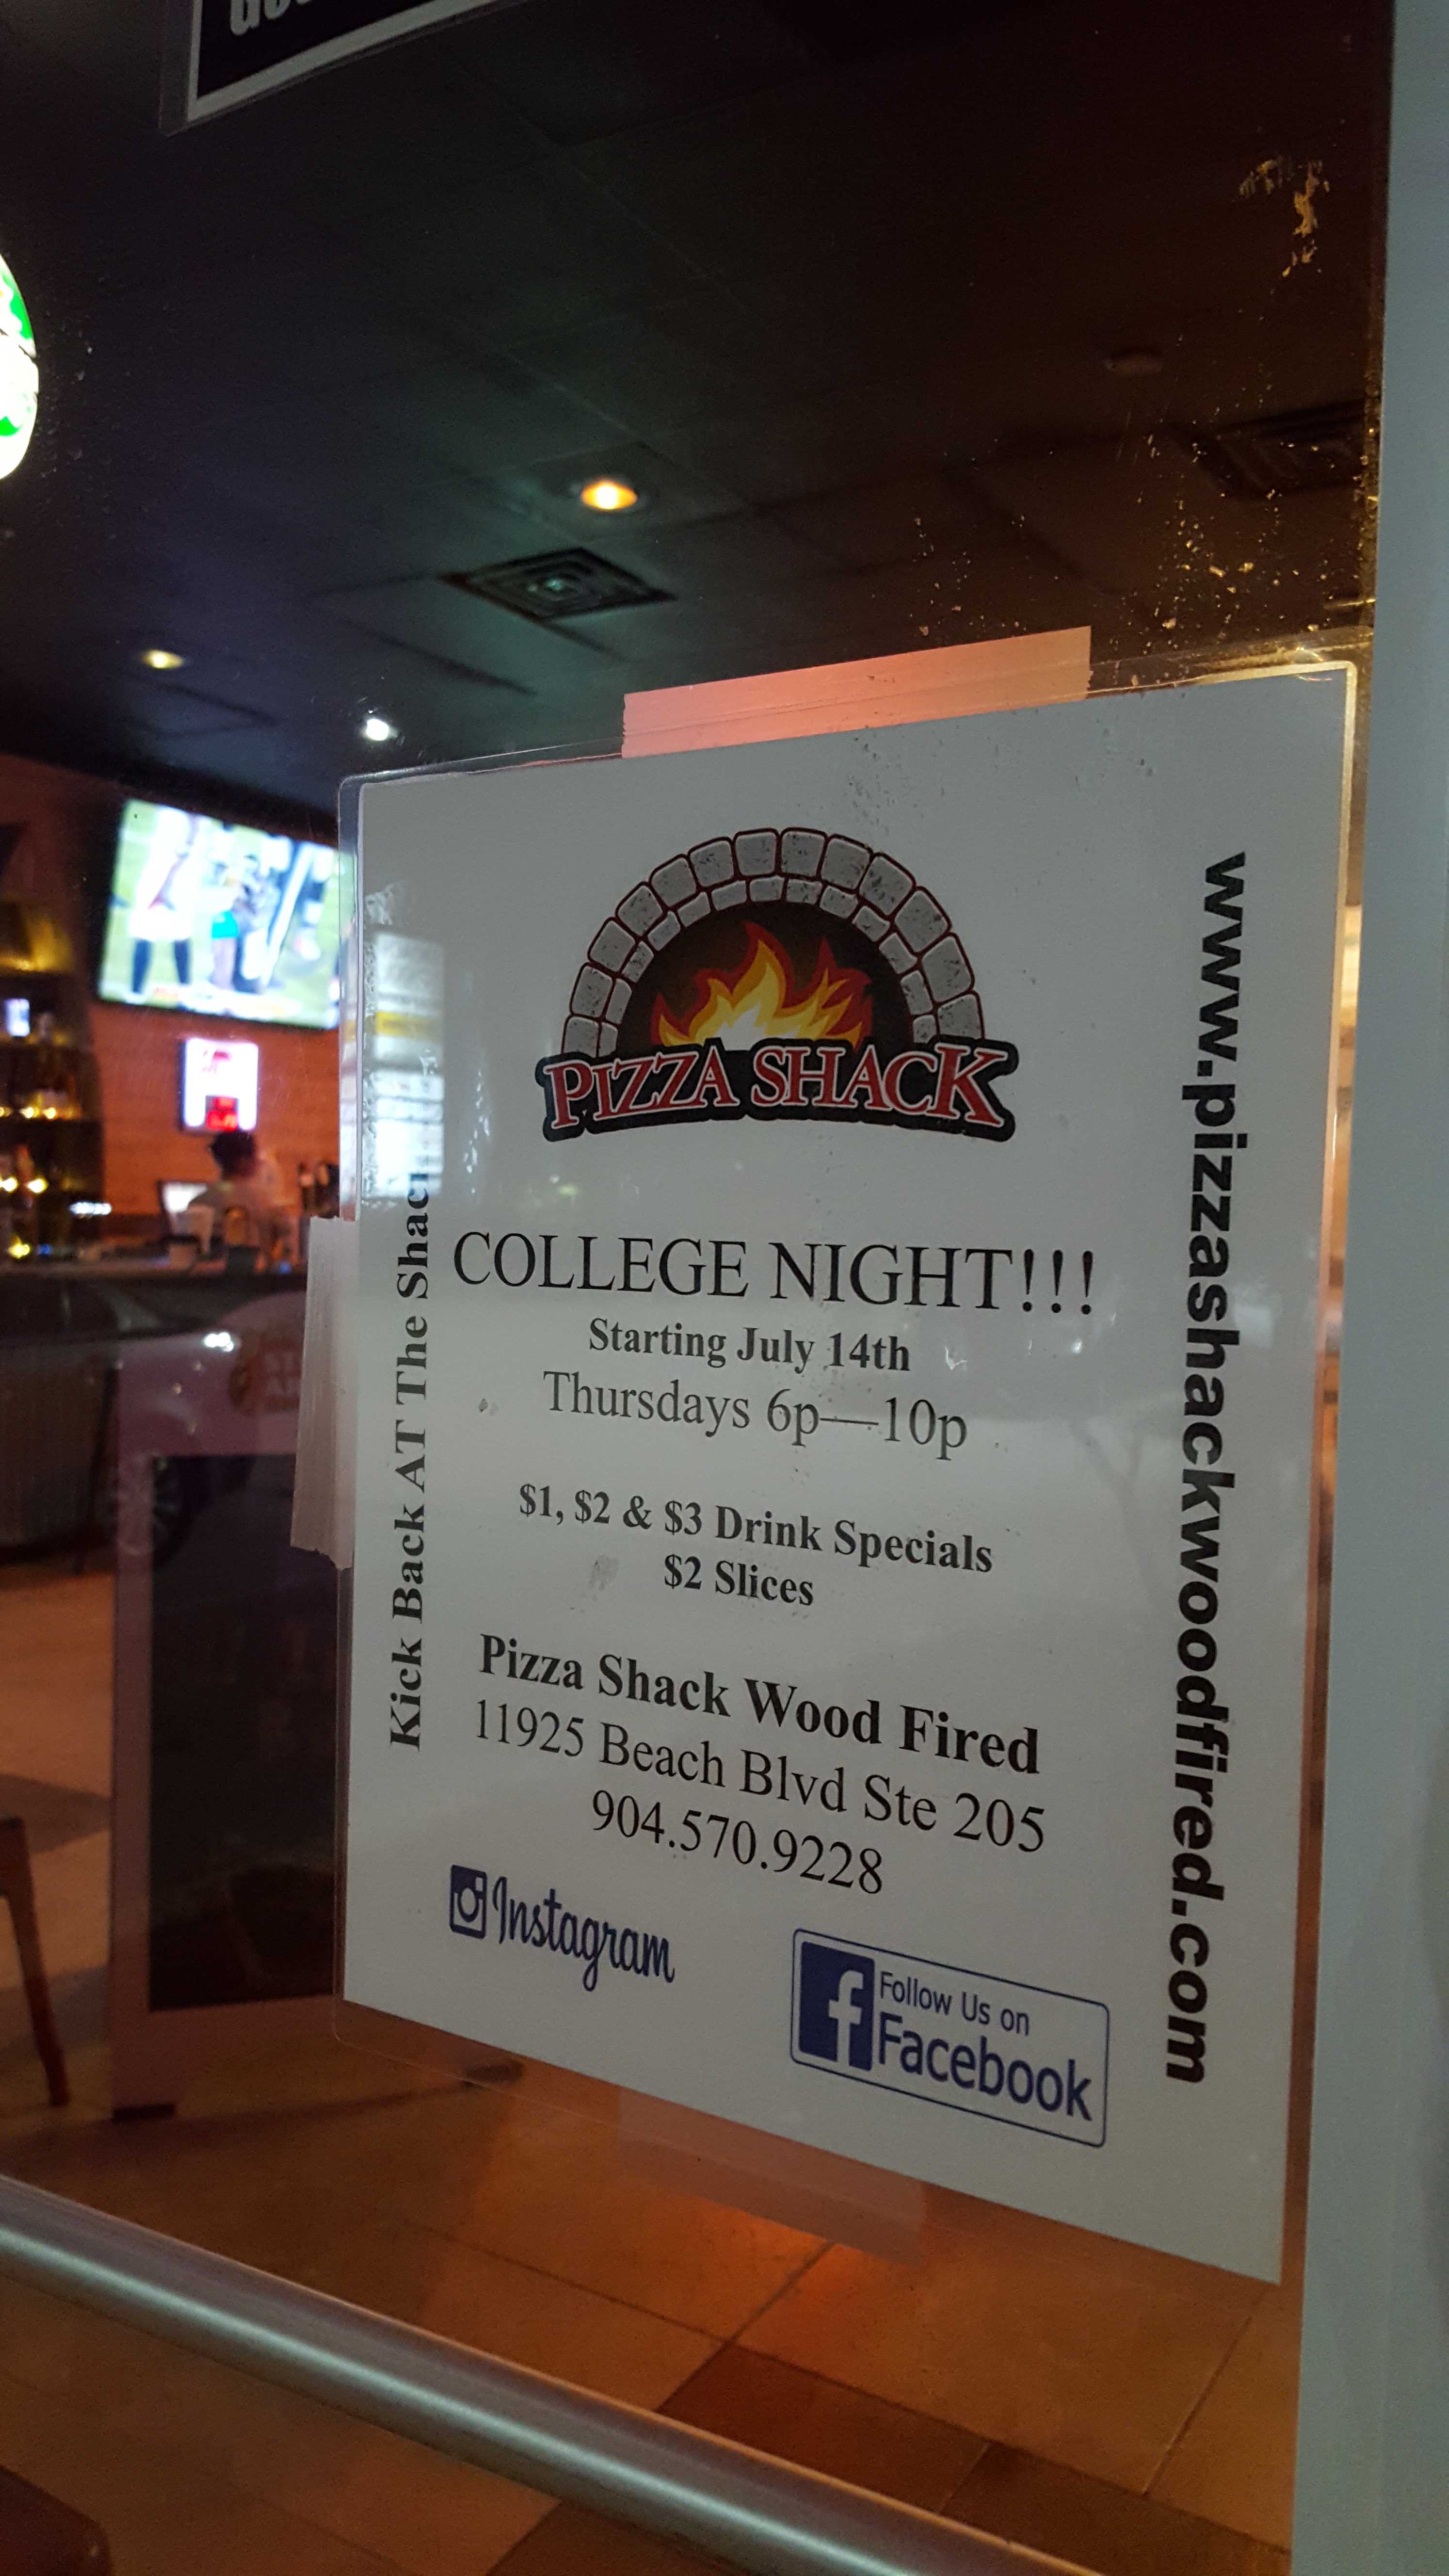 Pizza Shack offers discounted drinks and pizza for college night every Thursday. Photo by Courtney Stringfellow